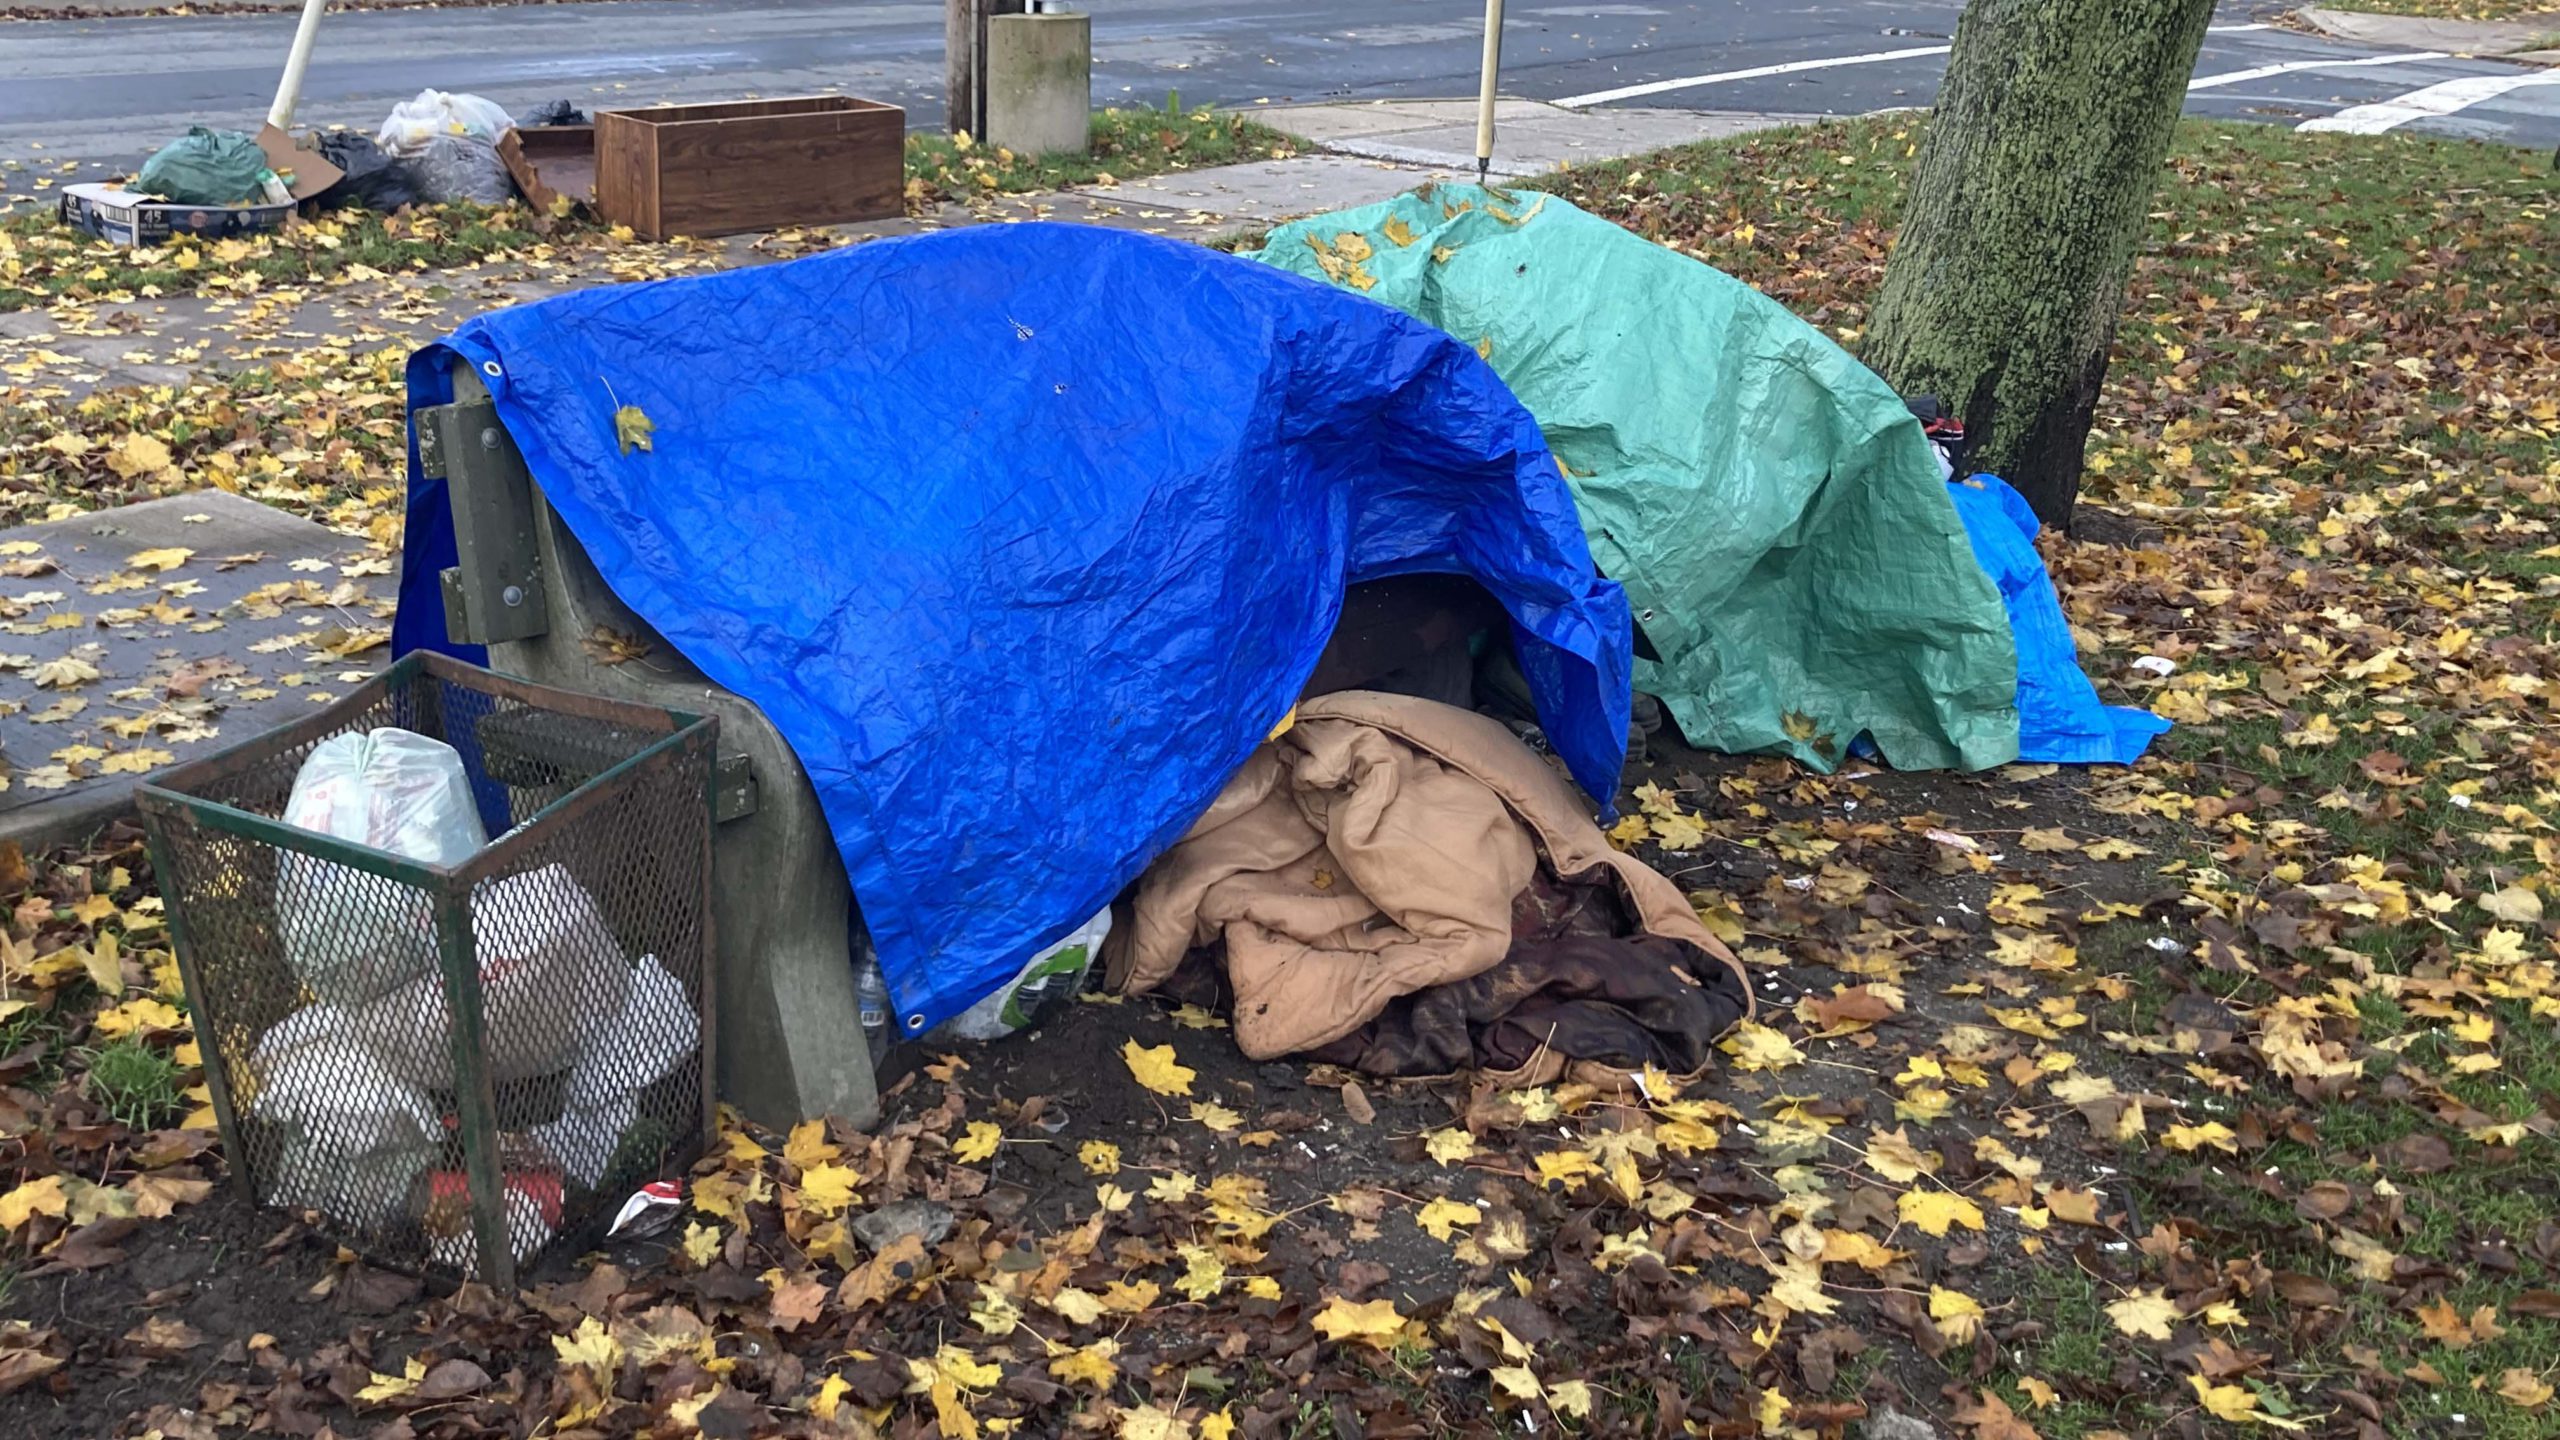 A report says 492 people are experiencing homelessness in HRM.